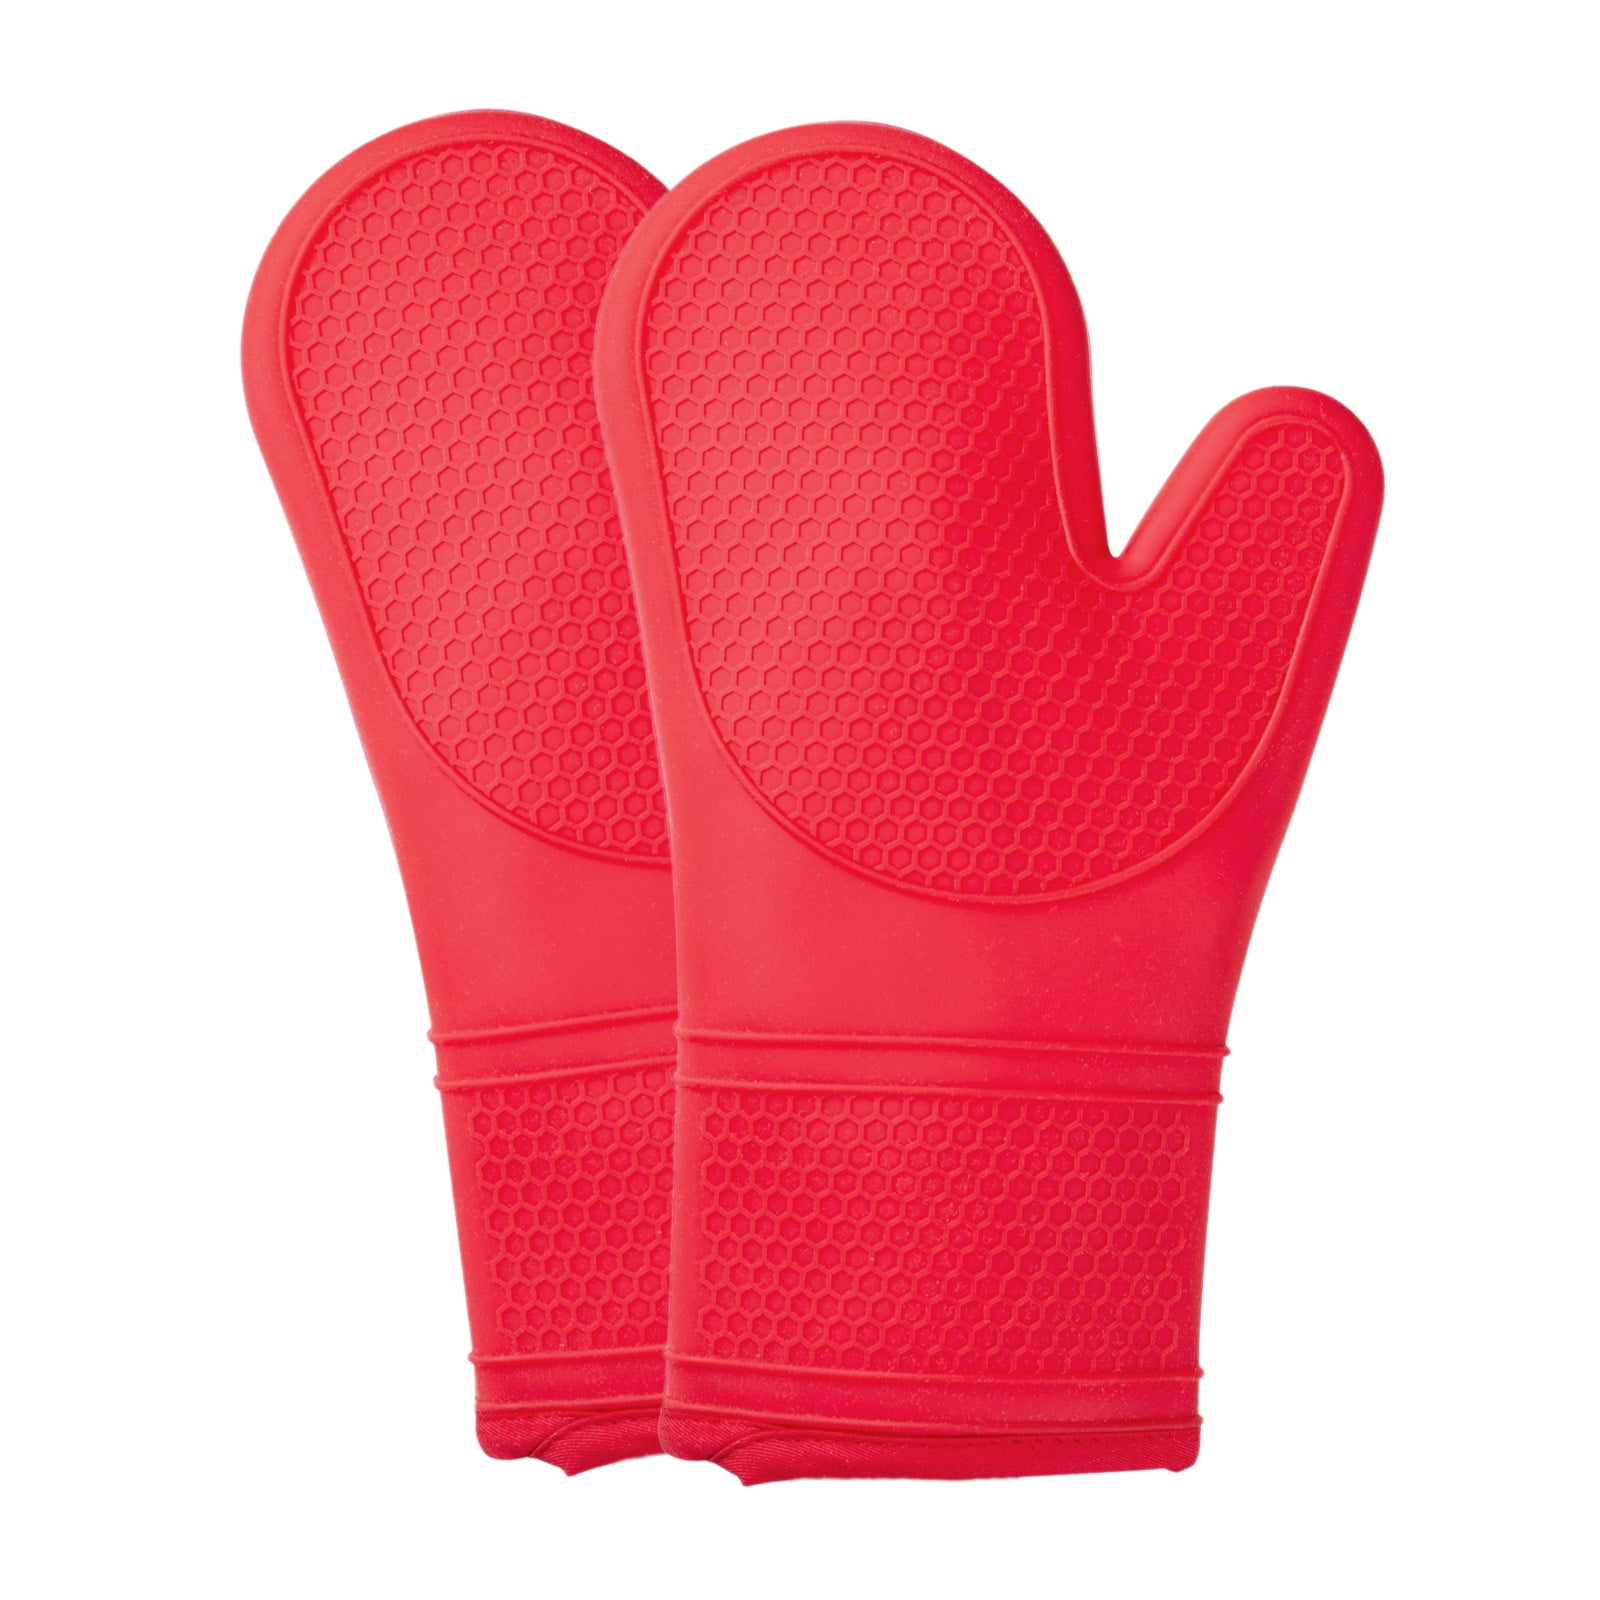 KLEX 1 Pair Extra Long Silicone and Cotton Oven Mitt for Oven Cooking,  Baking and Grilling, Up to 600 Degrees Heat Resistance, Poly Fleece Quilted  Lining, Red, 15 inches